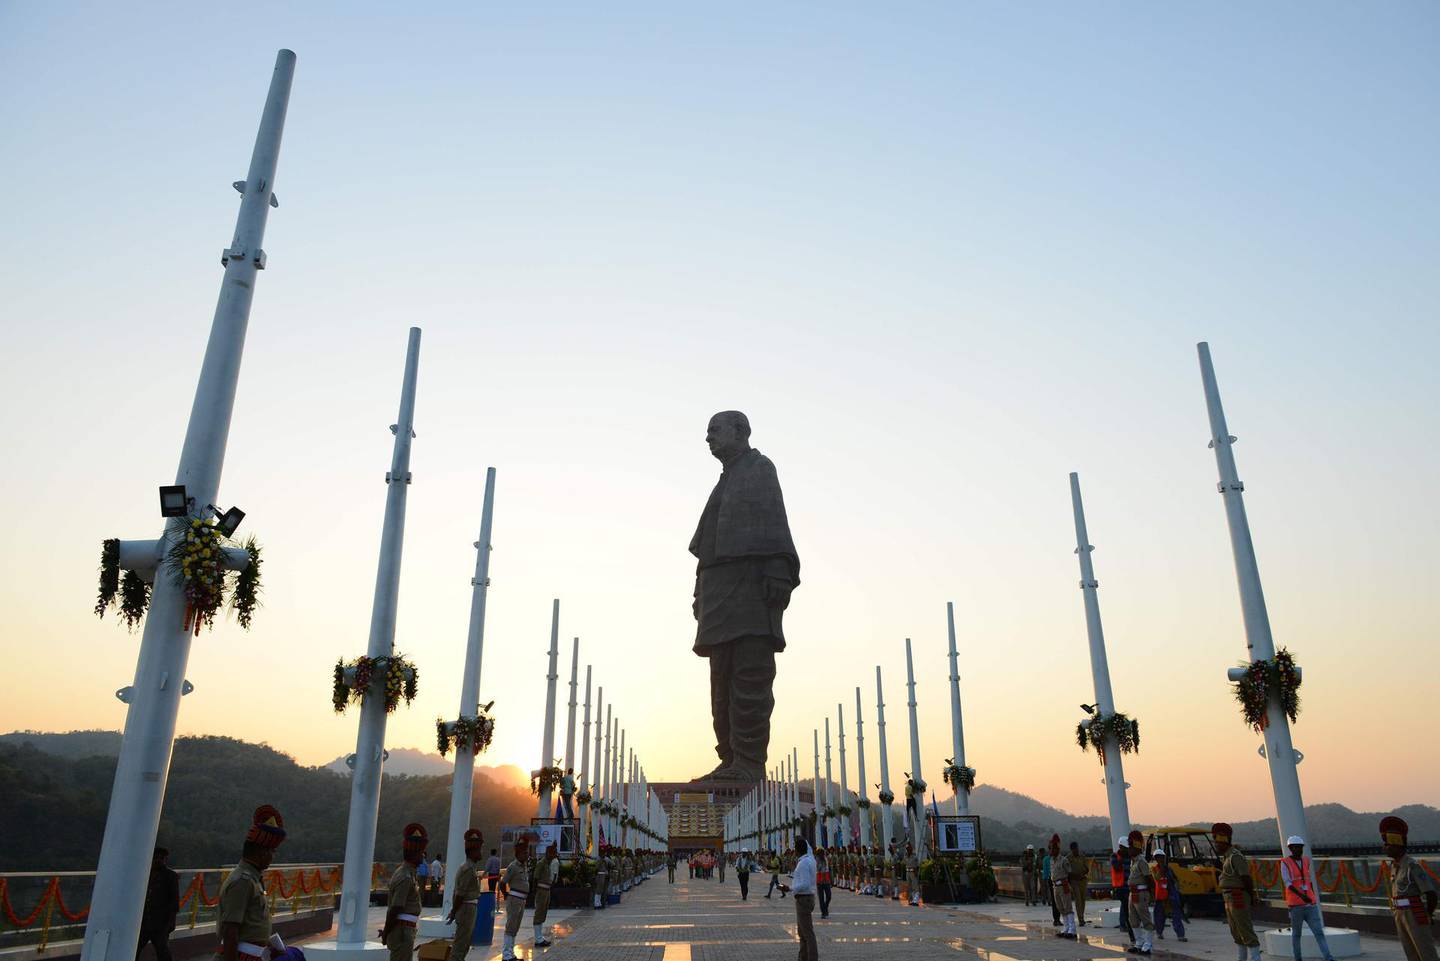 TOPSHOT - Indian policemen stand guard near the "Statue Of Unity", the world's tallest statue dedicated to Indian independence leader Sardar Vallabhbhai Patel, near Sardar Sarovar Dam near Vadodara in India's western Gujarat state on October 30, 2018.  Indian Prime Minister, Narendra Modi will inaugurate the 182-metre-high (600-foot-high) "Statue Of Unity", which is a tribute to independence icon Sardar Vallabhbhai Patel, on October 31.  / AFP / SAM PANTHAKY
